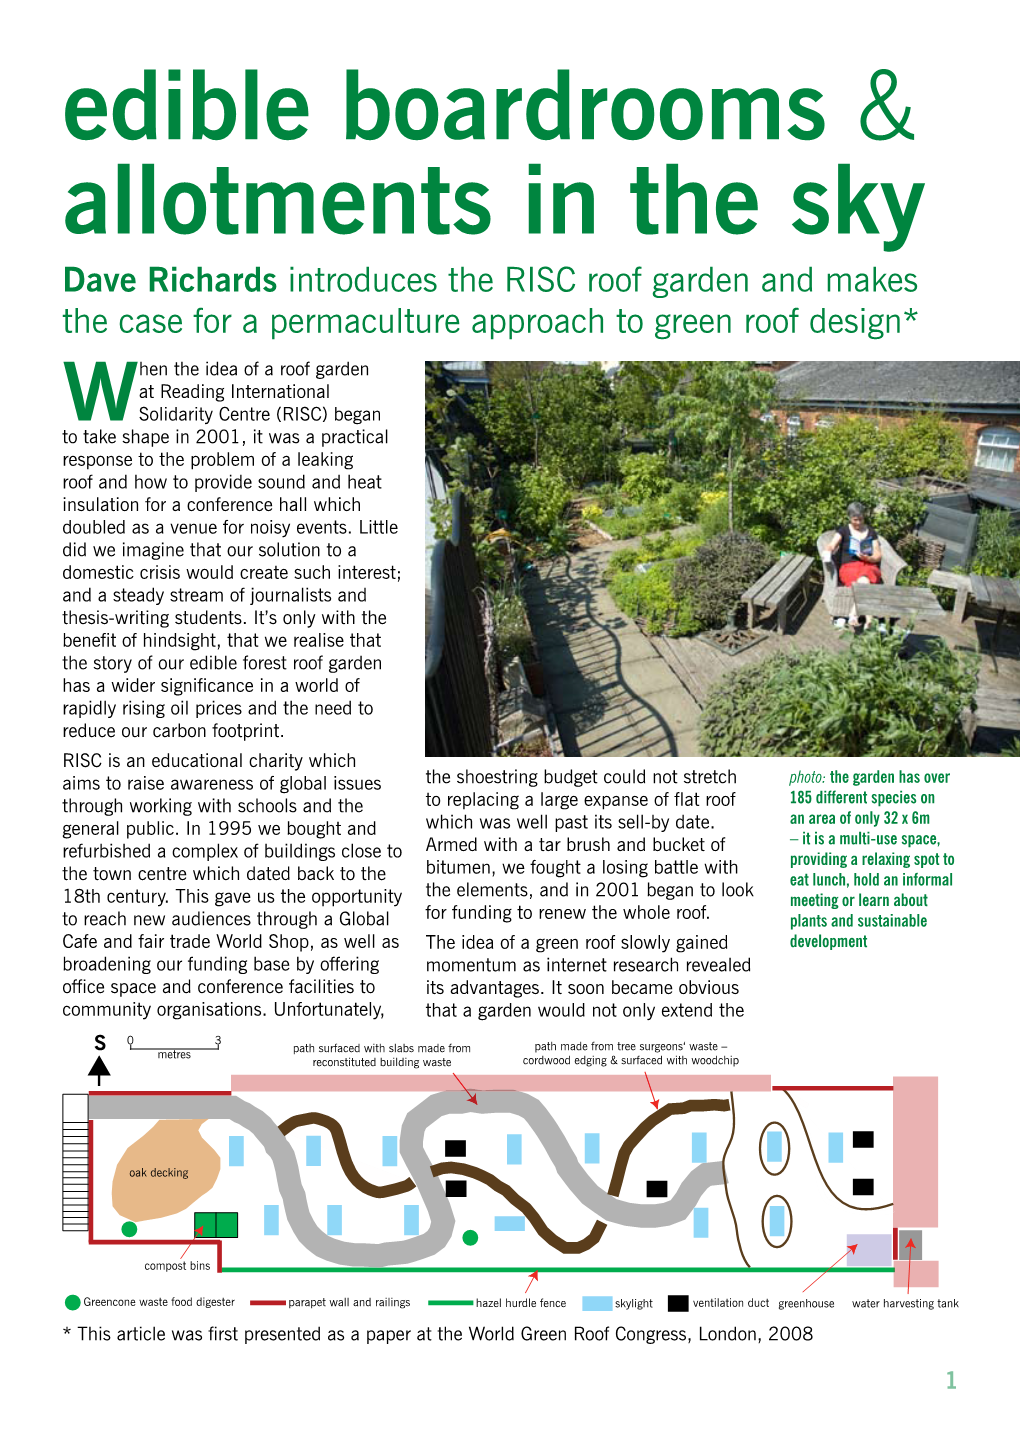 Edible Boardrooms & Allotments in The